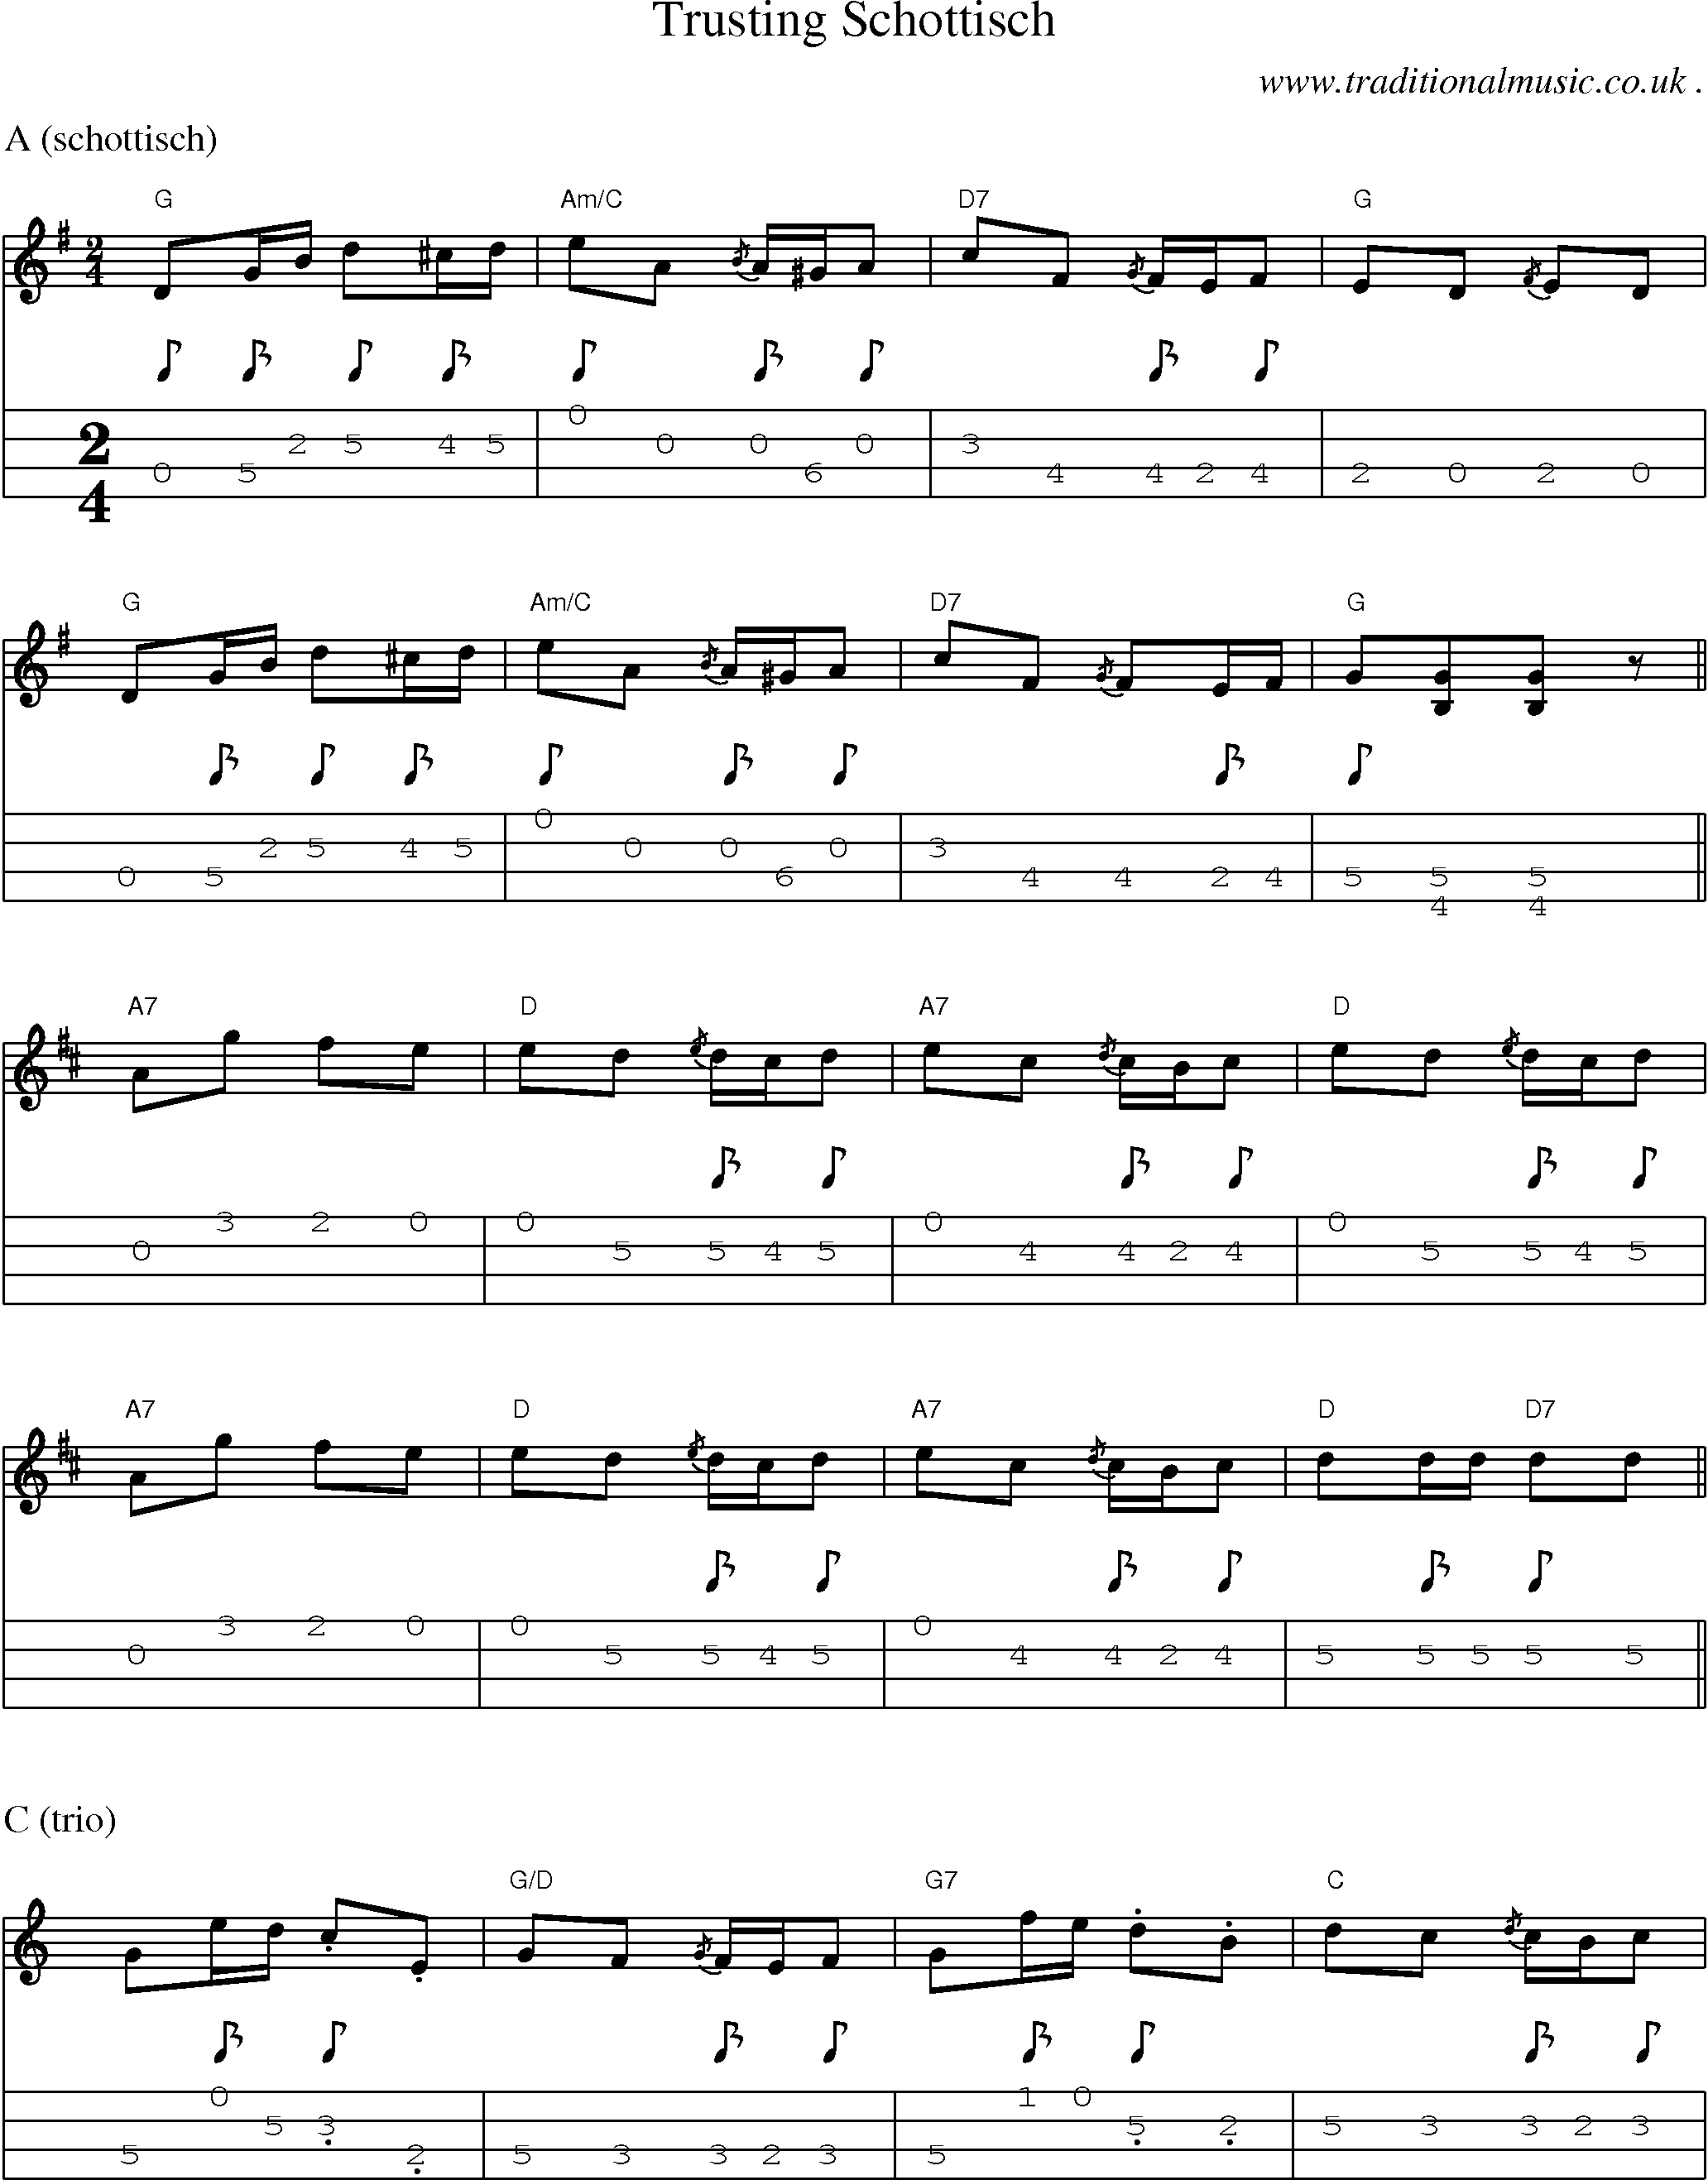 Sheet-music  score, Chords and Mandolin Tabs for Trusting Schottisch